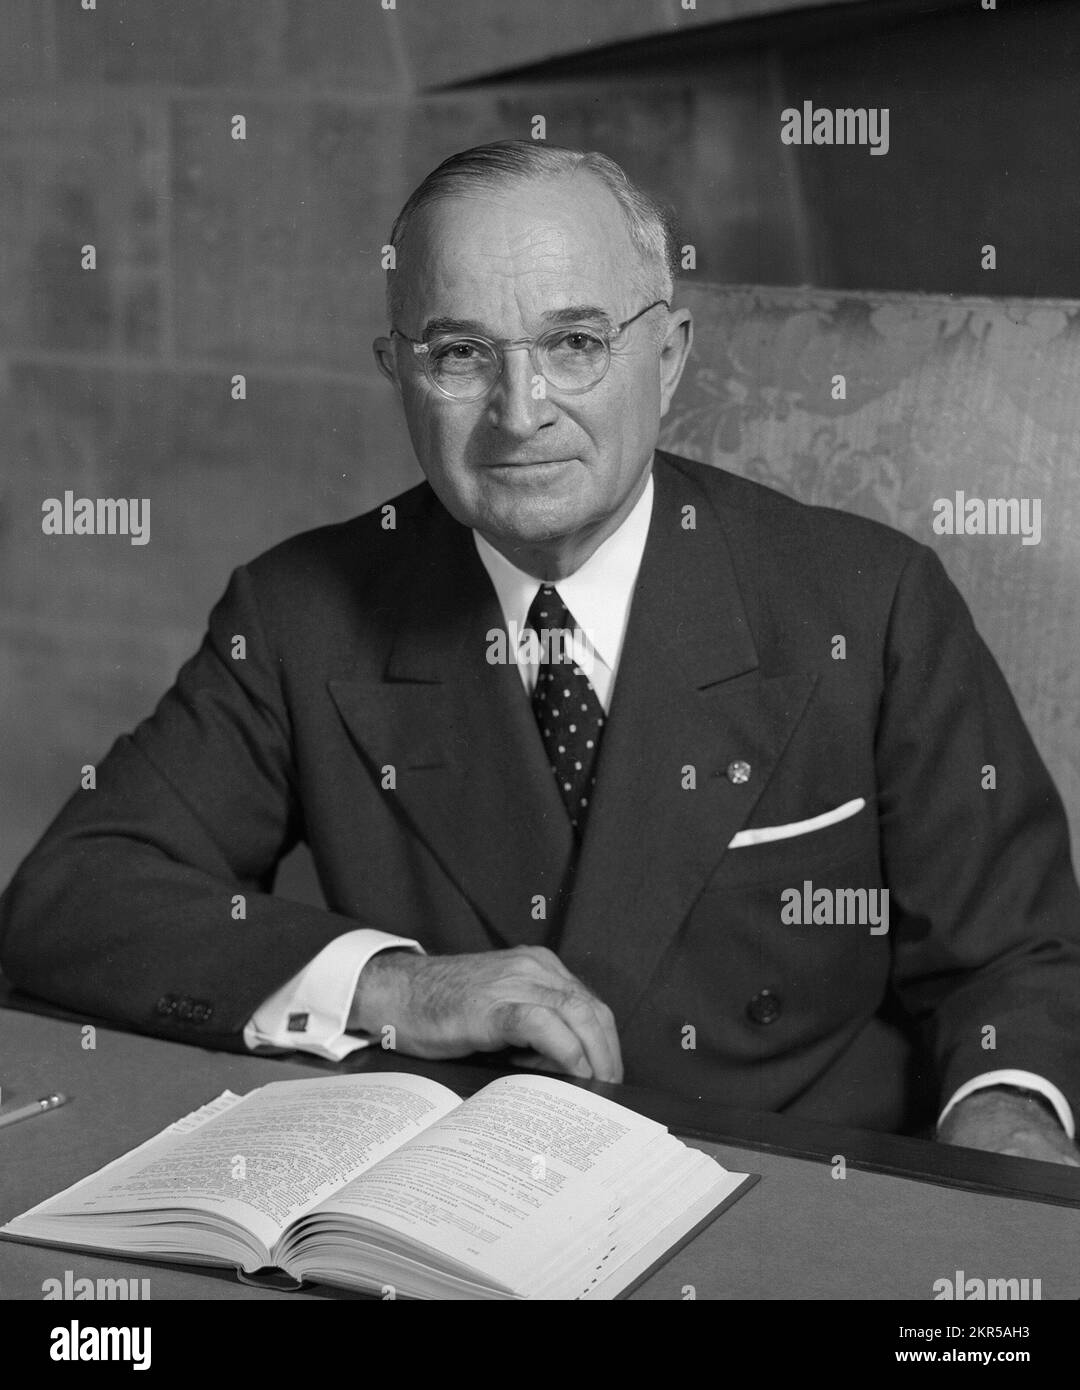 An official presidential portrait of President Harry S Truman. Stock Photo